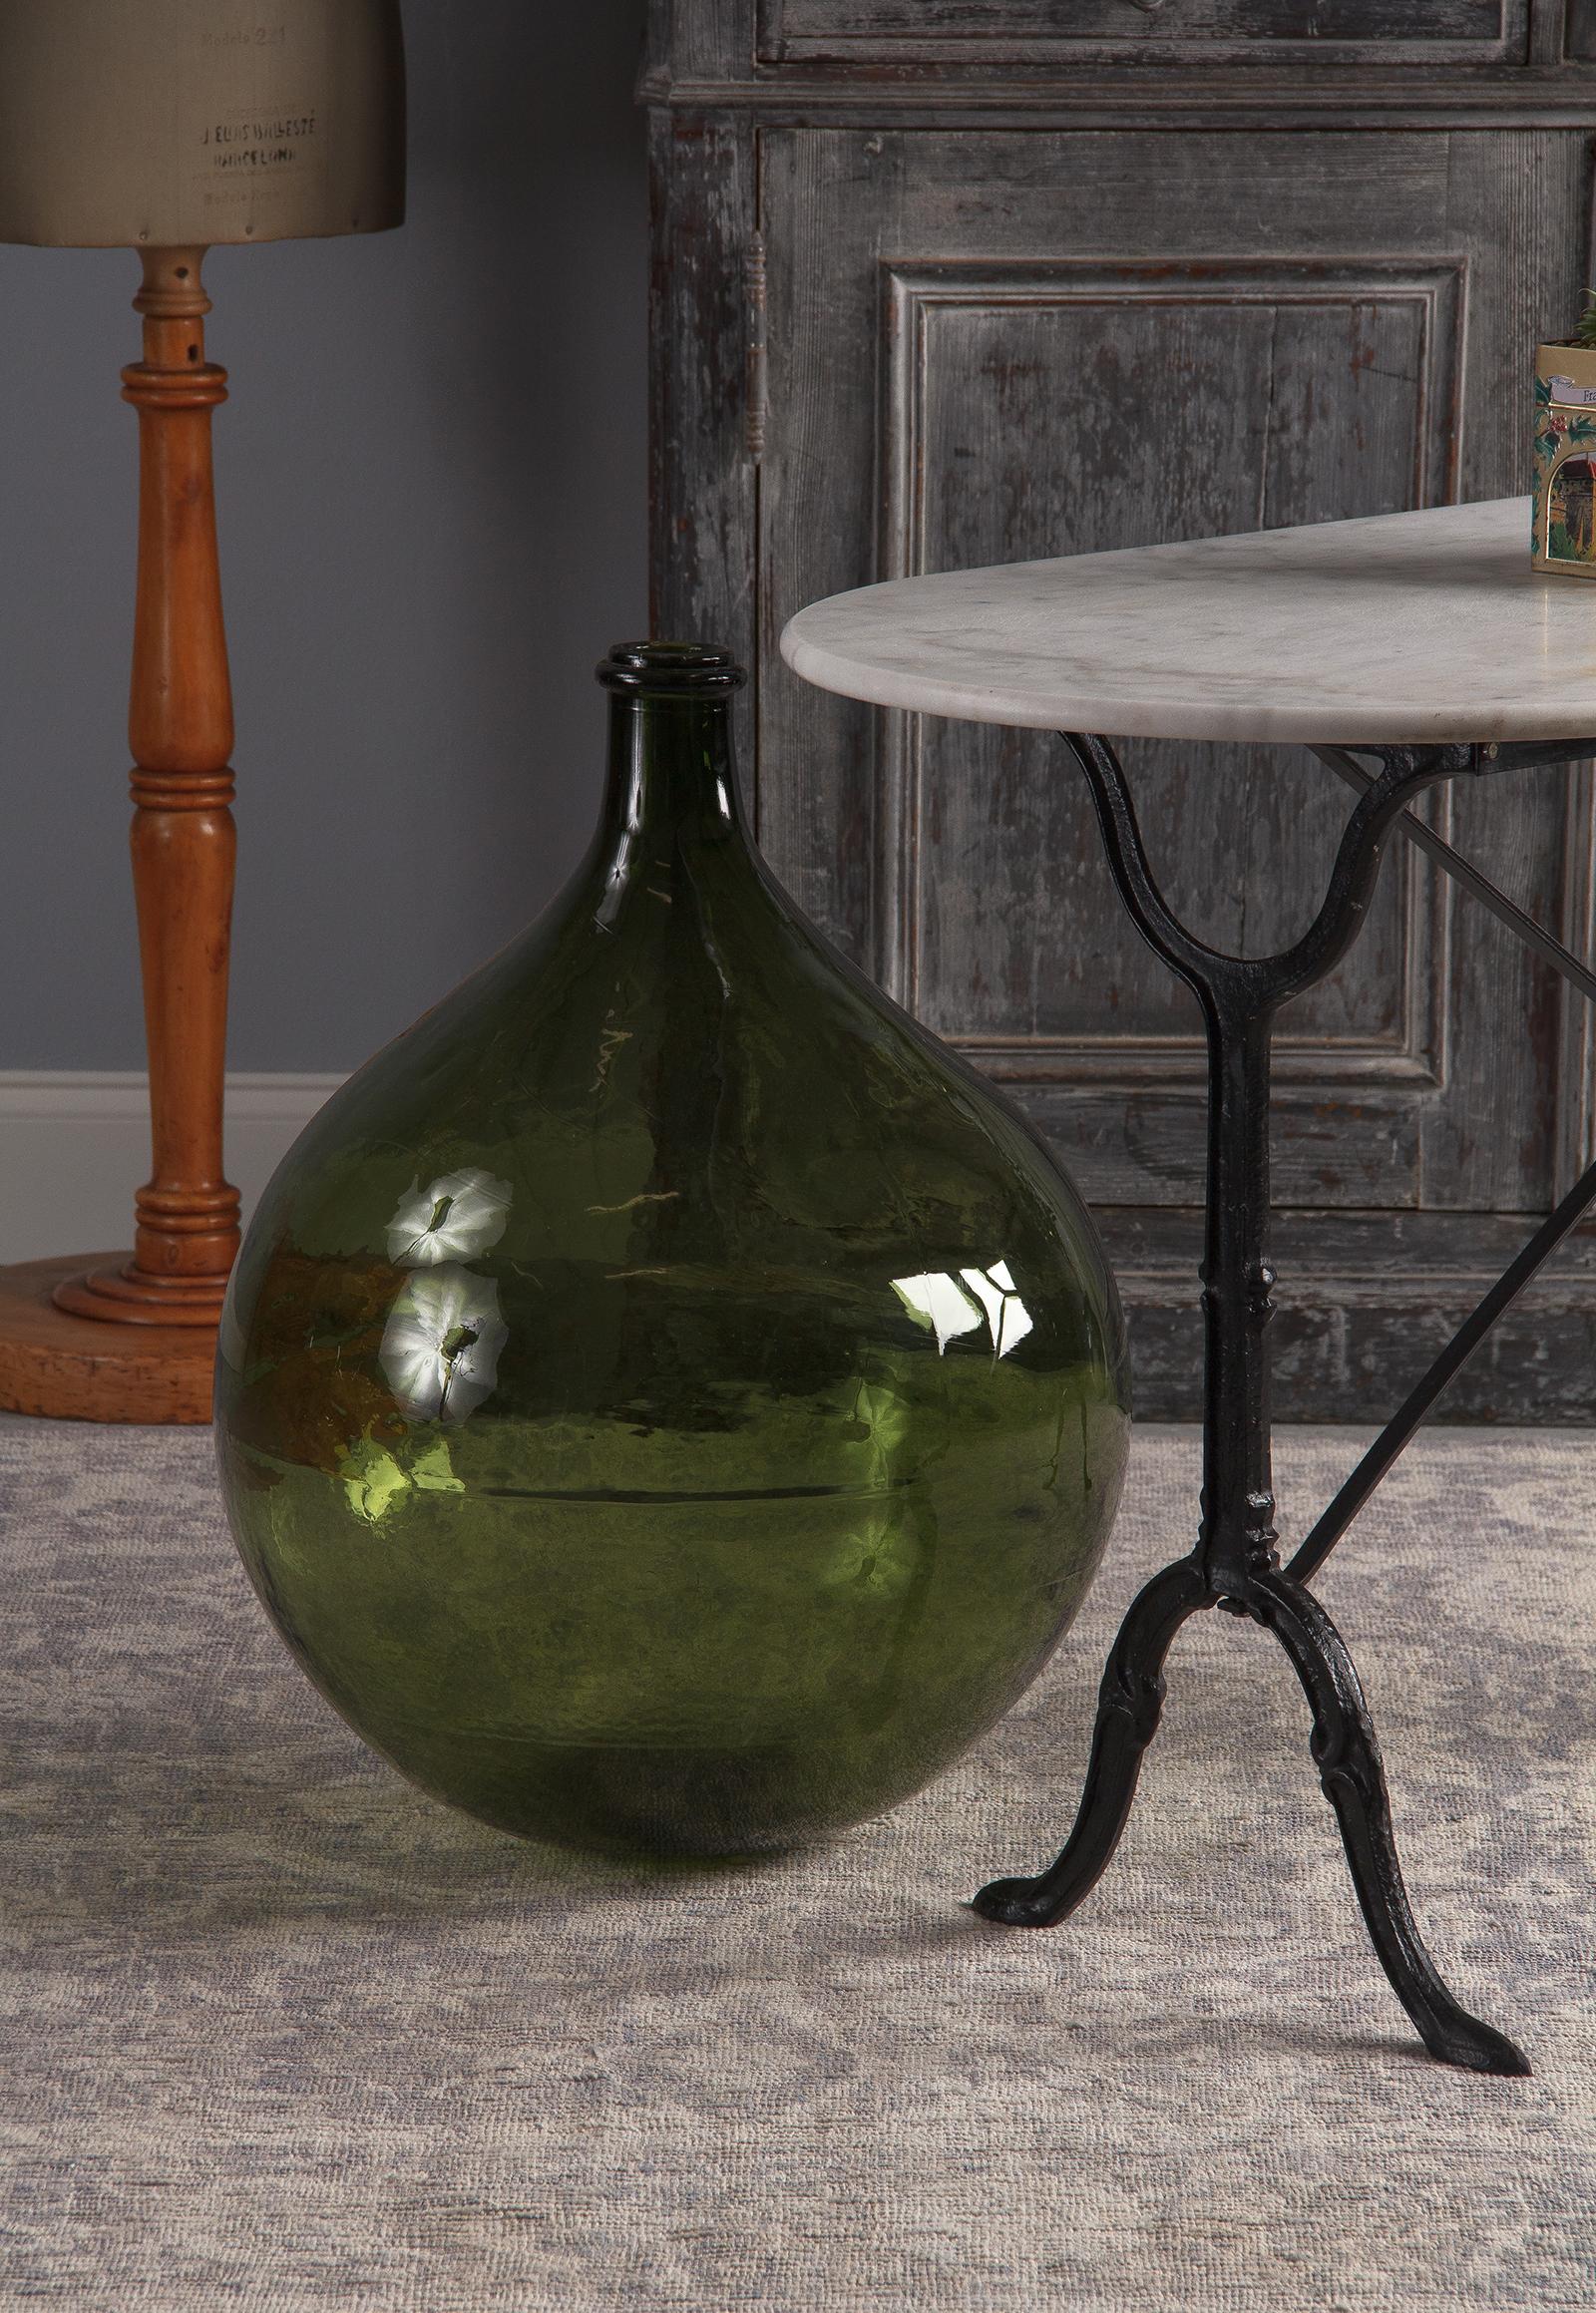 An oversized green glass bonbonne demijohn bottle, circa 1920. Wonderful green hand-blown glass was pressed into a mold and retains its ripples and bubbles. The mouth is 1.75